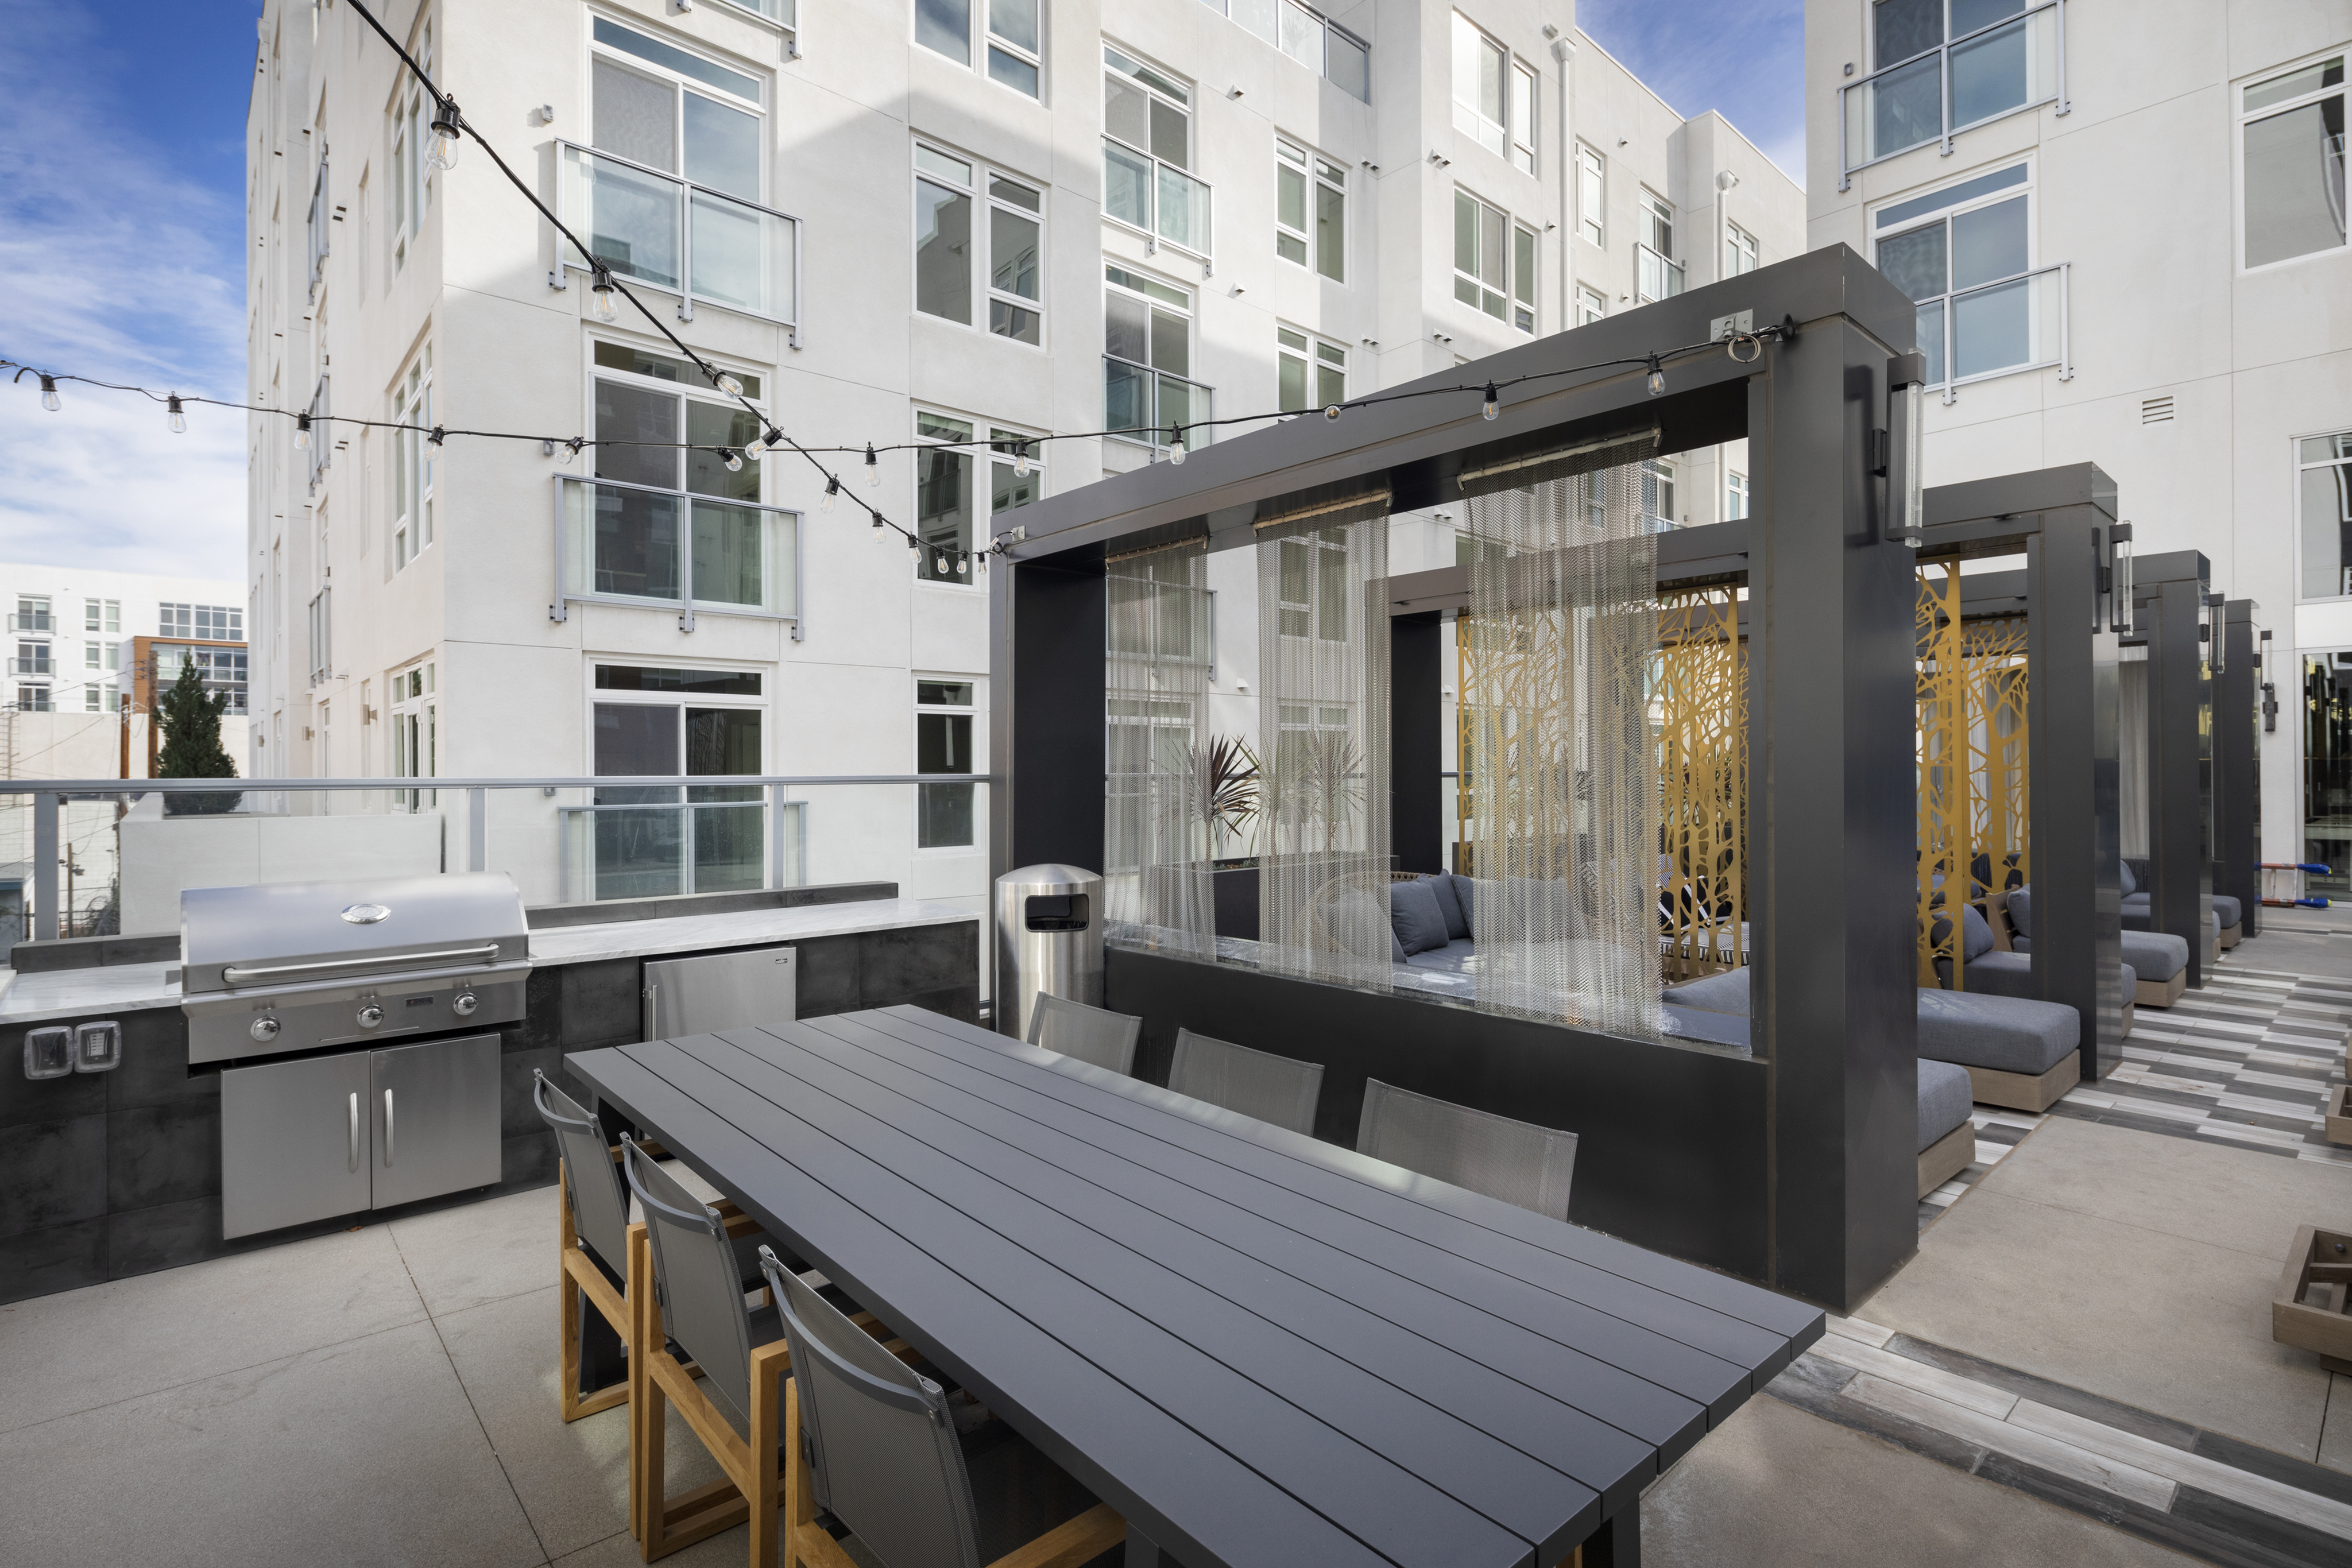 Seating on the rooftop with plenty of amenity space to host resident events